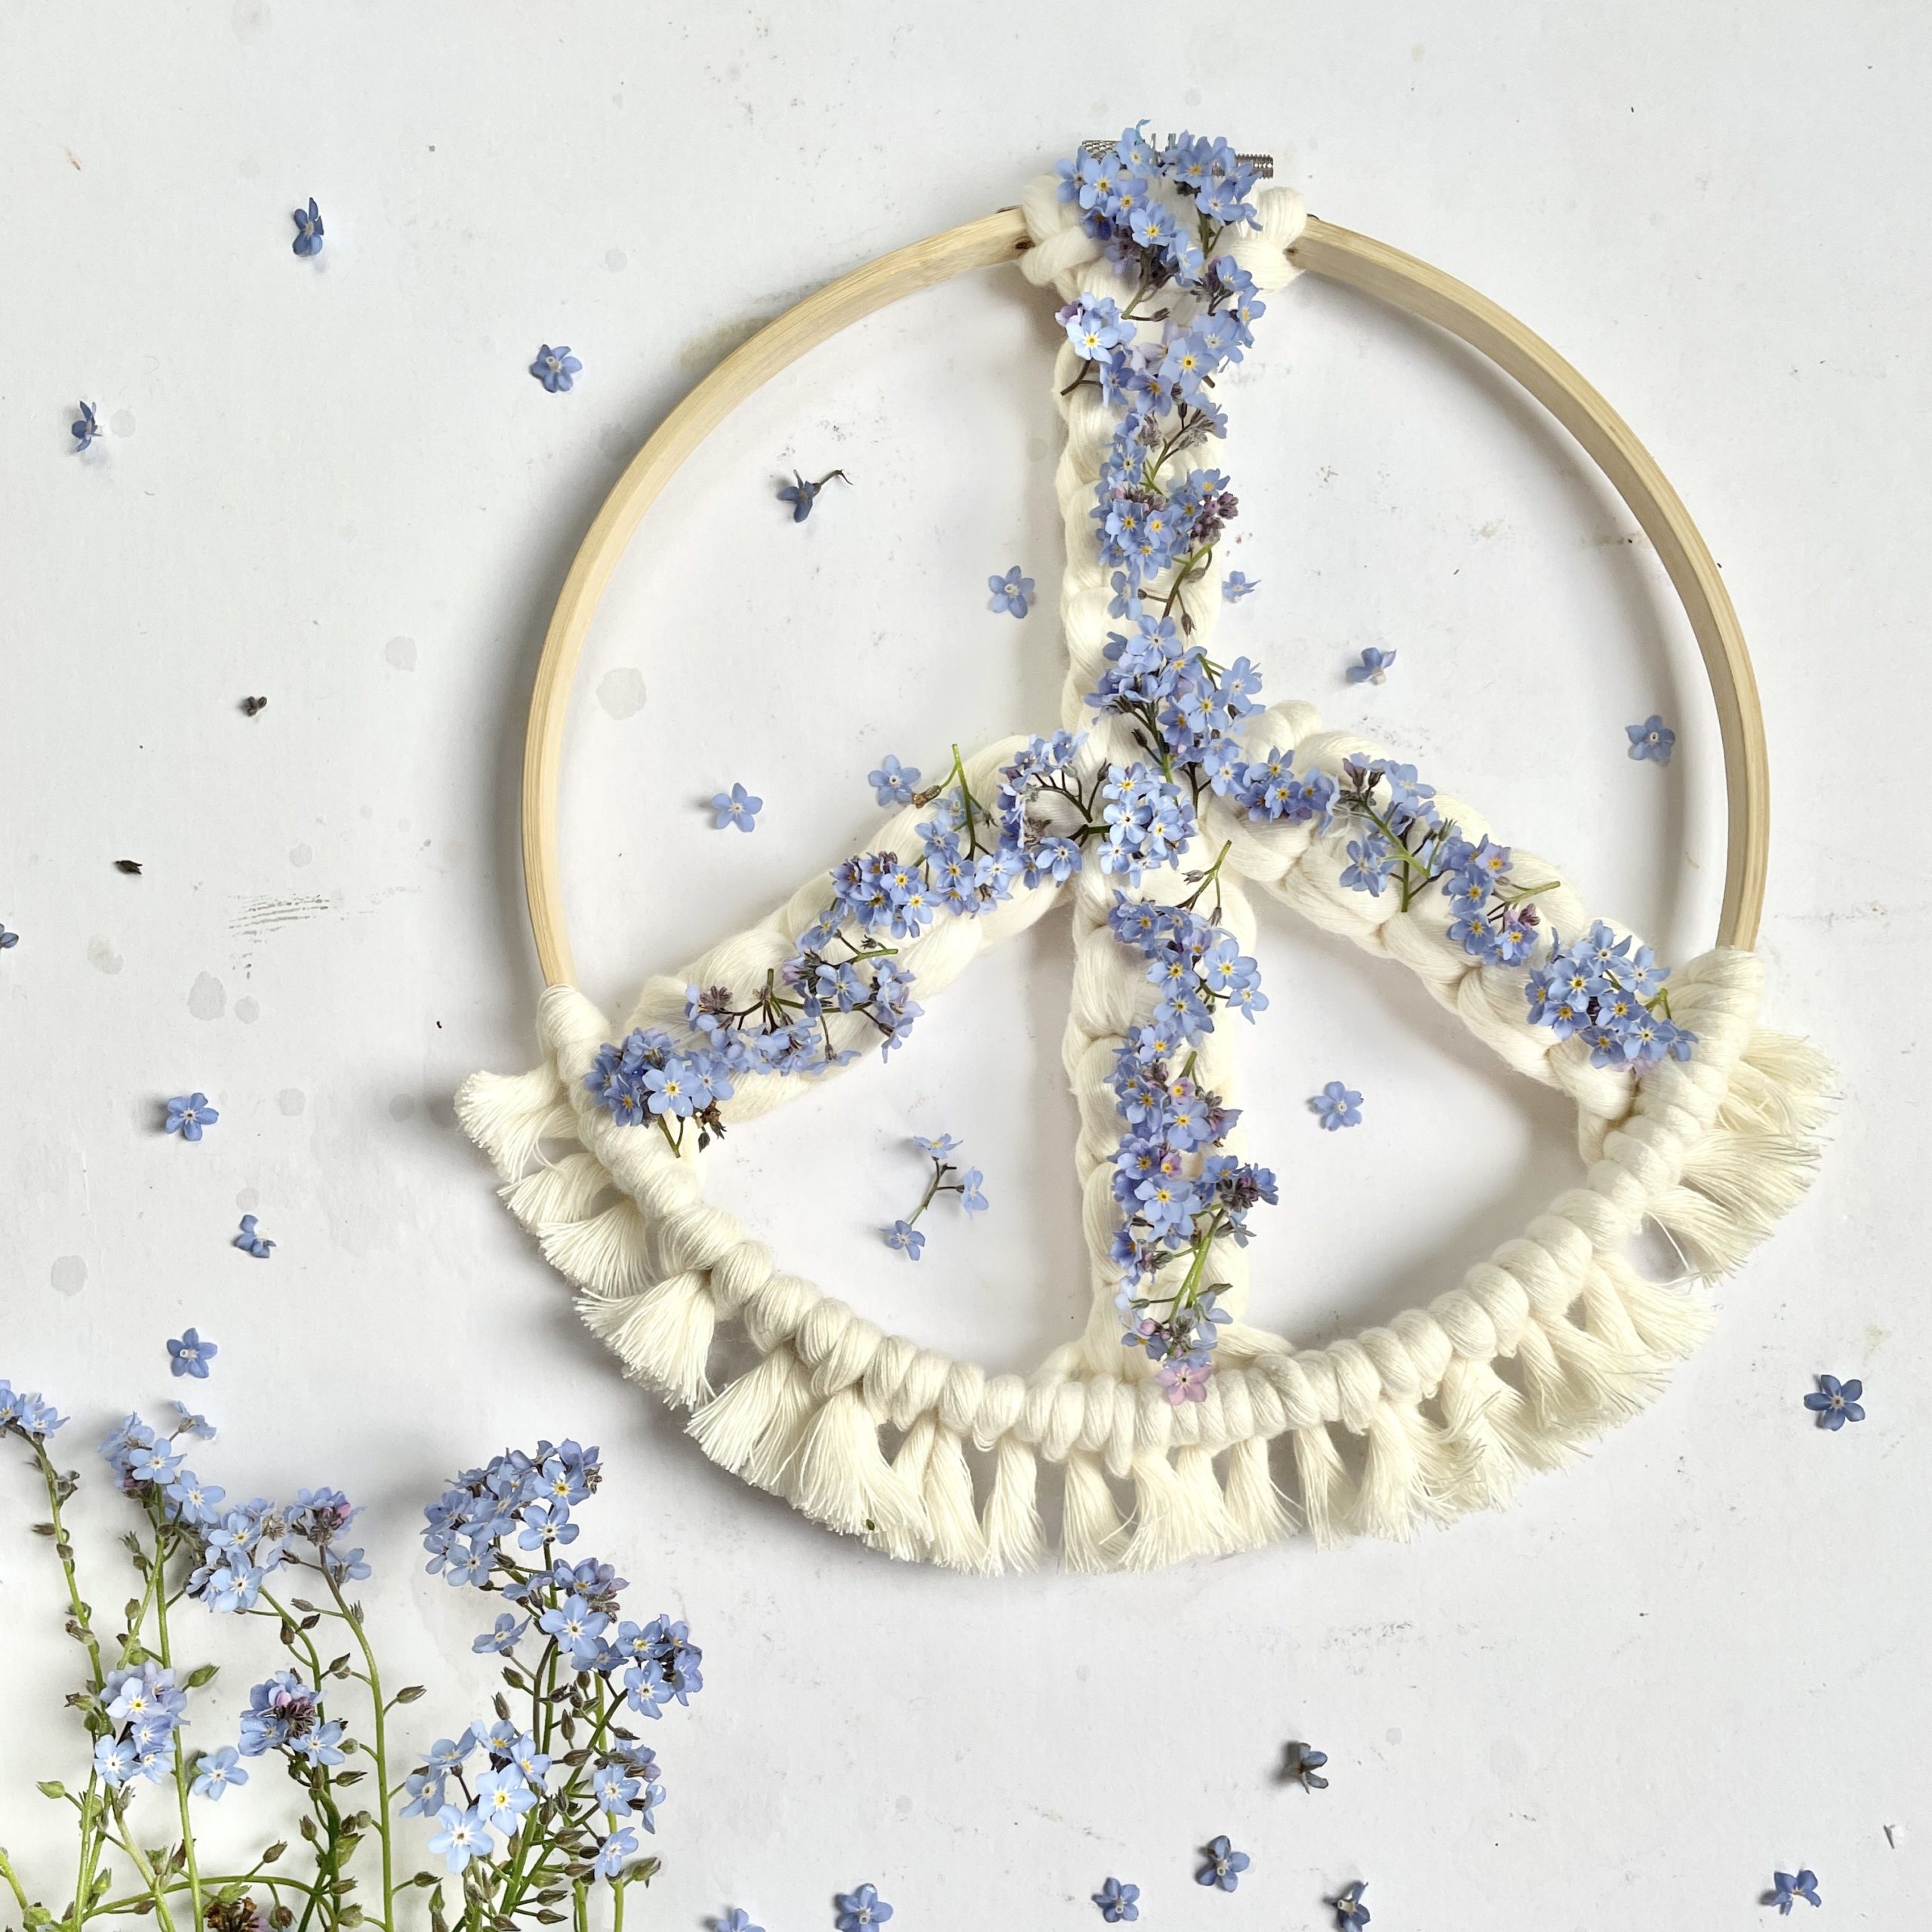 Macrame peace wreath with forget me not flowers